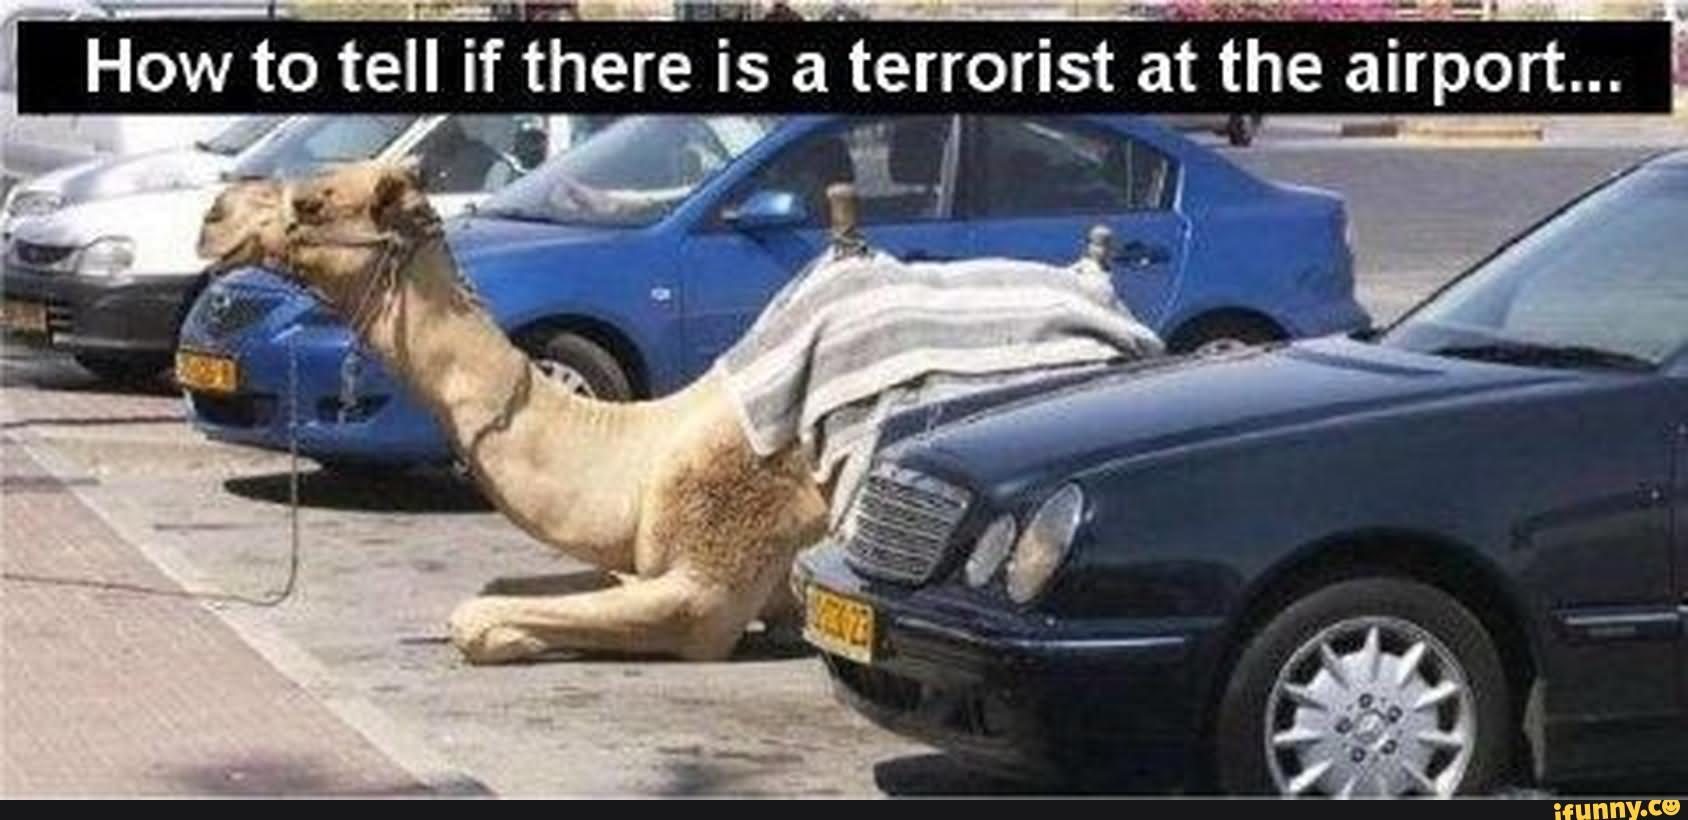 How To Tell If There Is A Terrorist At The Airport Funny Camel Image